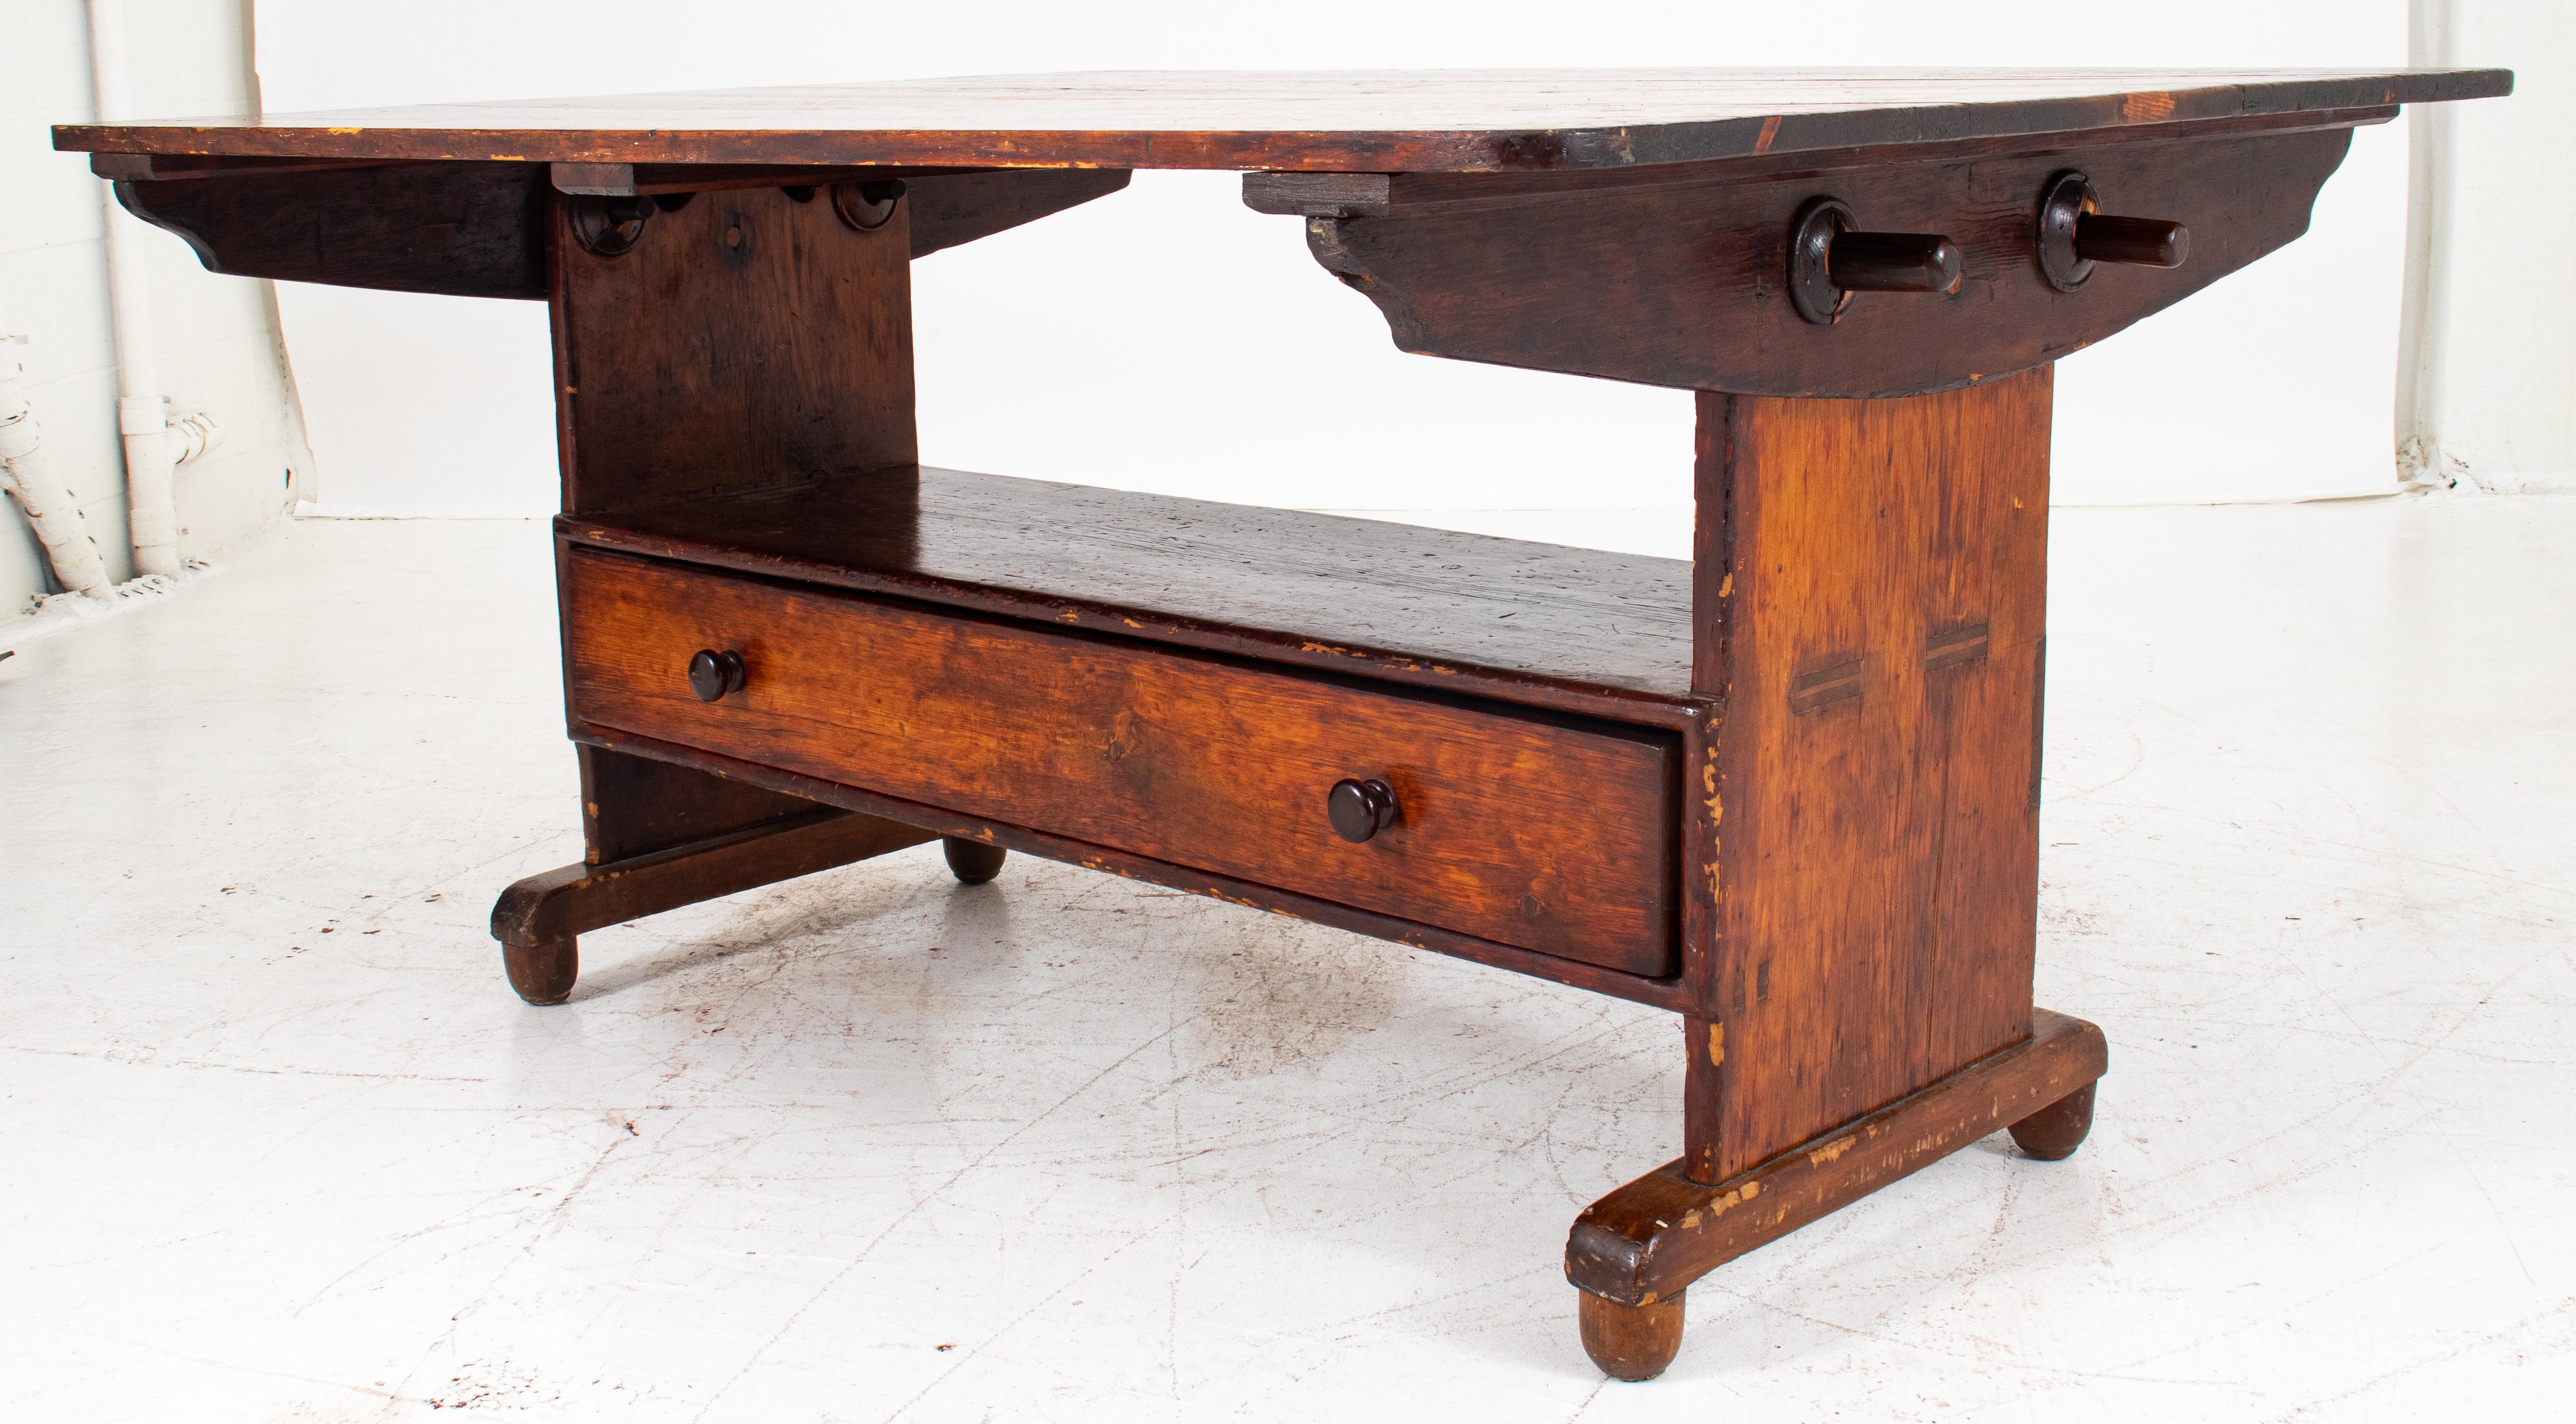 French Provincial Provincial French Pine Tavern Table-Bench, 19th C.